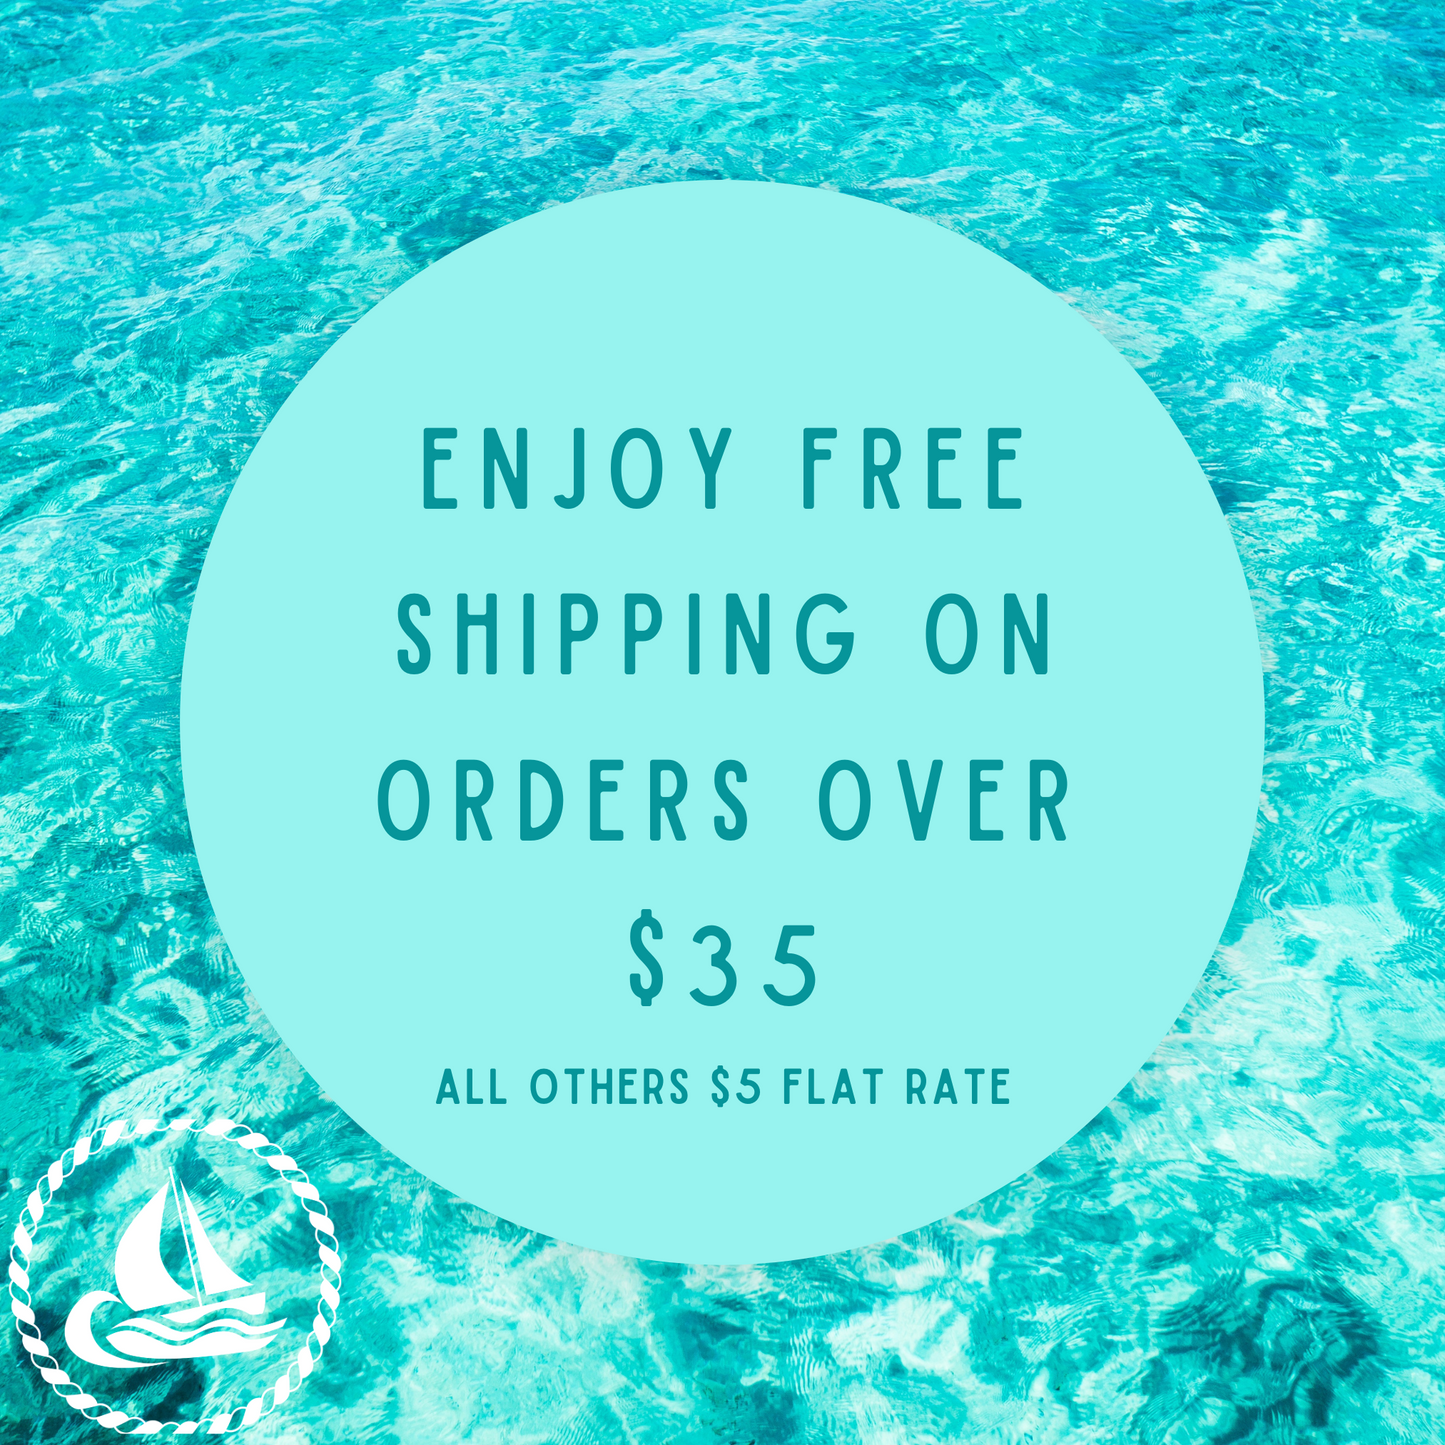 Free shipping on orders over $35